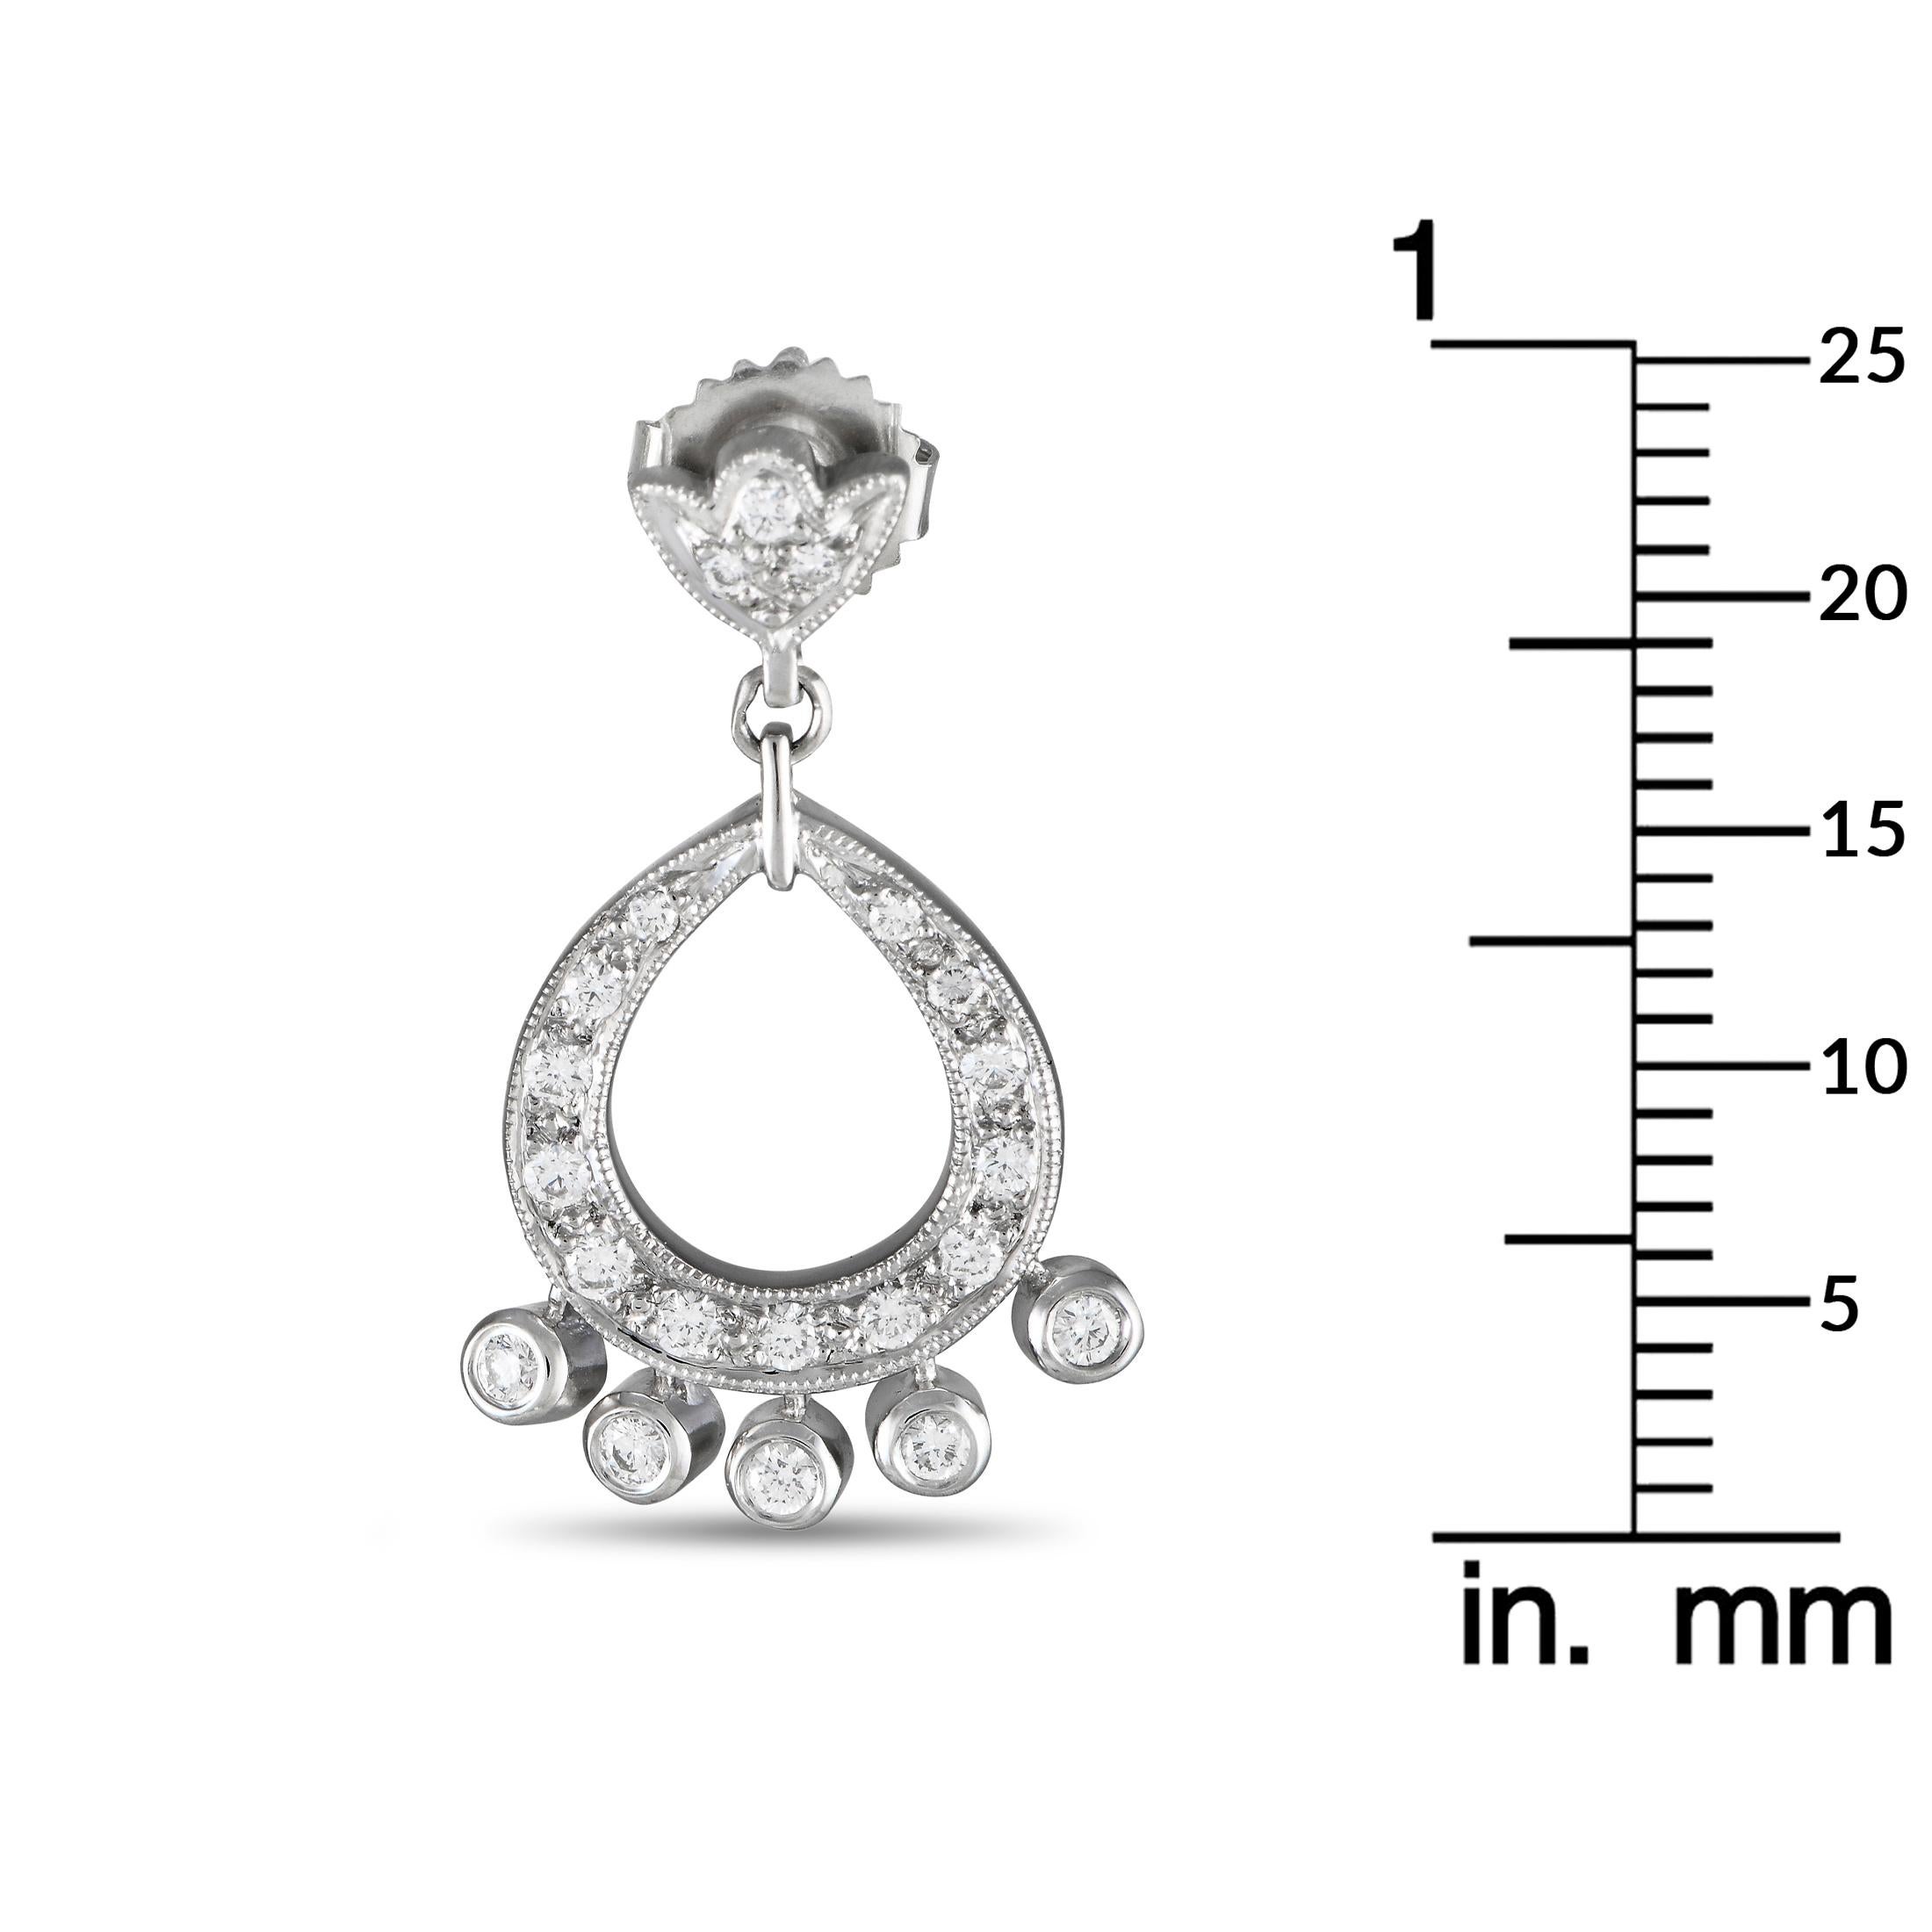 Leslie Greene 18K White Gold 0.65ct Diamond Drop Earrings LG25-020124 In Excellent Condition For Sale In Southampton, PA